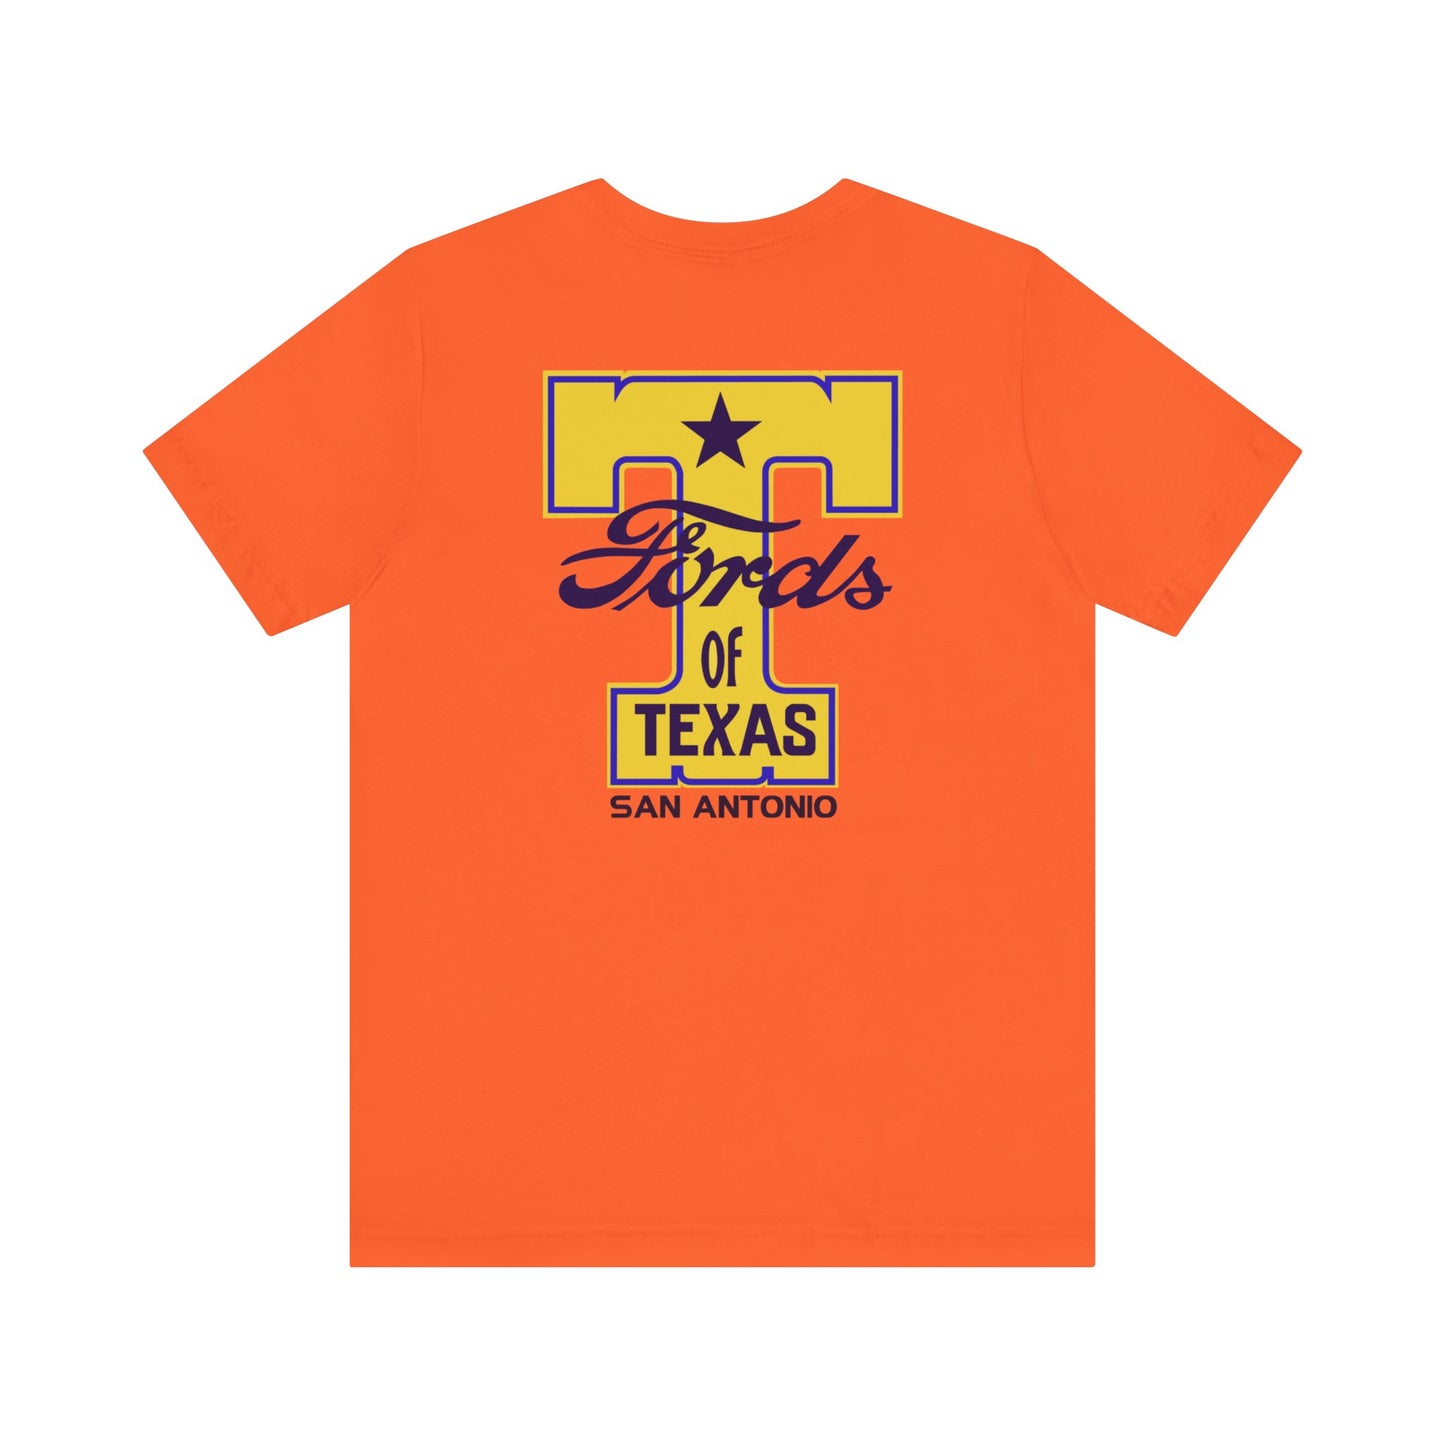 T Fords of Texas (front and back print) Unisex Jersey Short Sleeve Tee